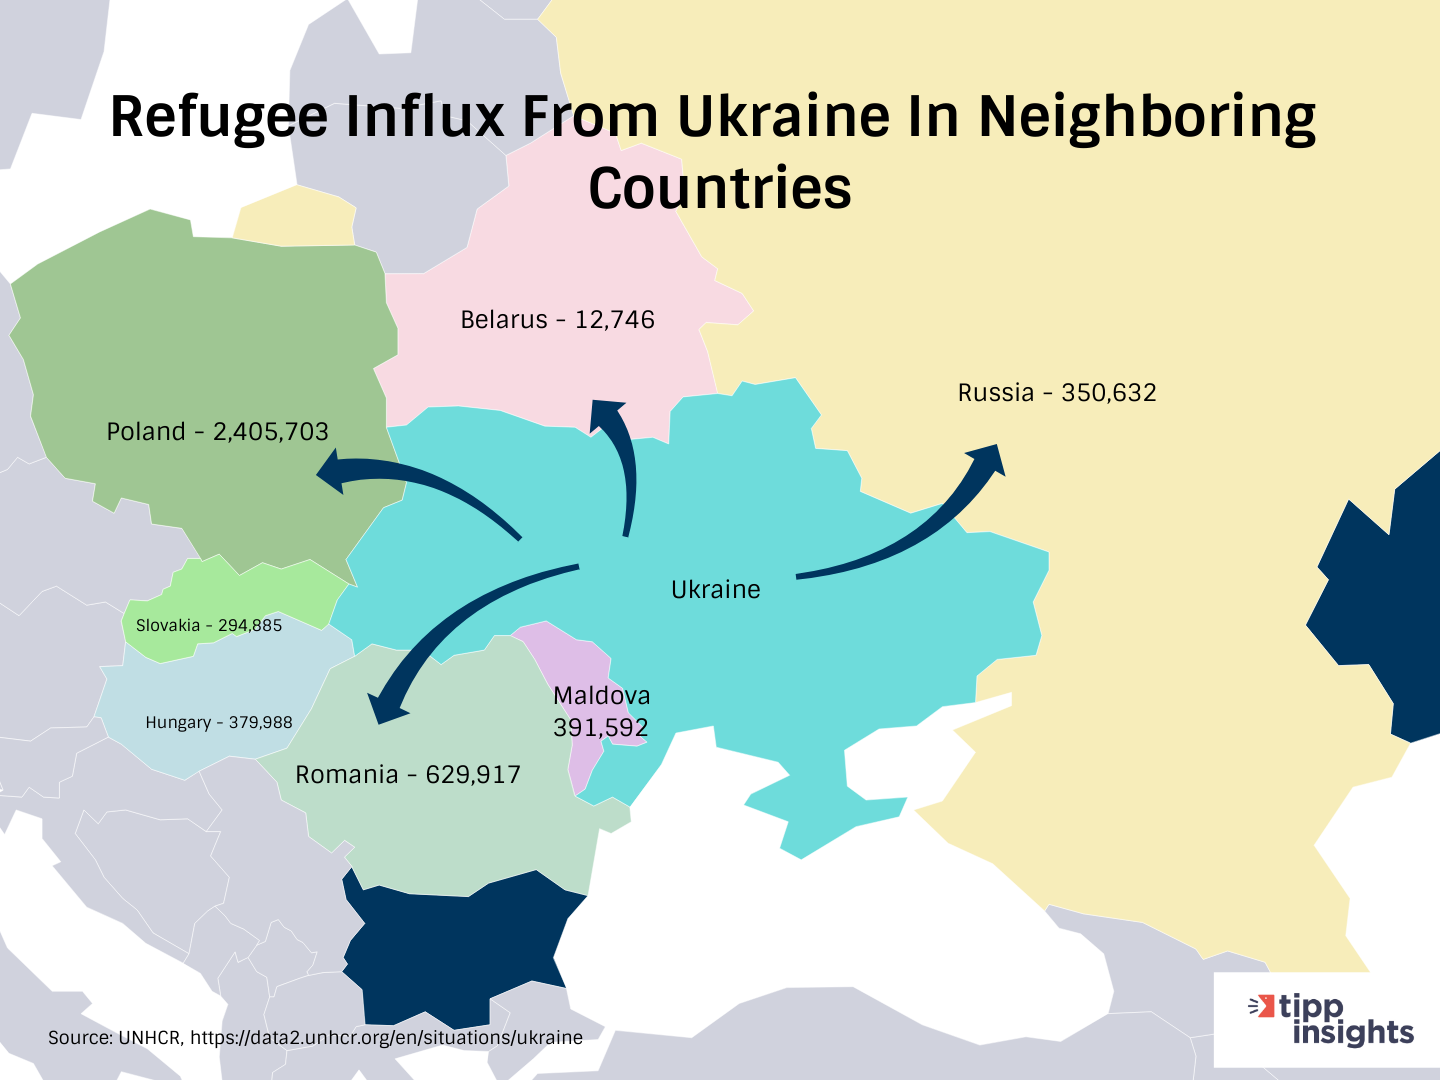 Refugee influx from Ukraine in neighboring countries - April 2, 2022